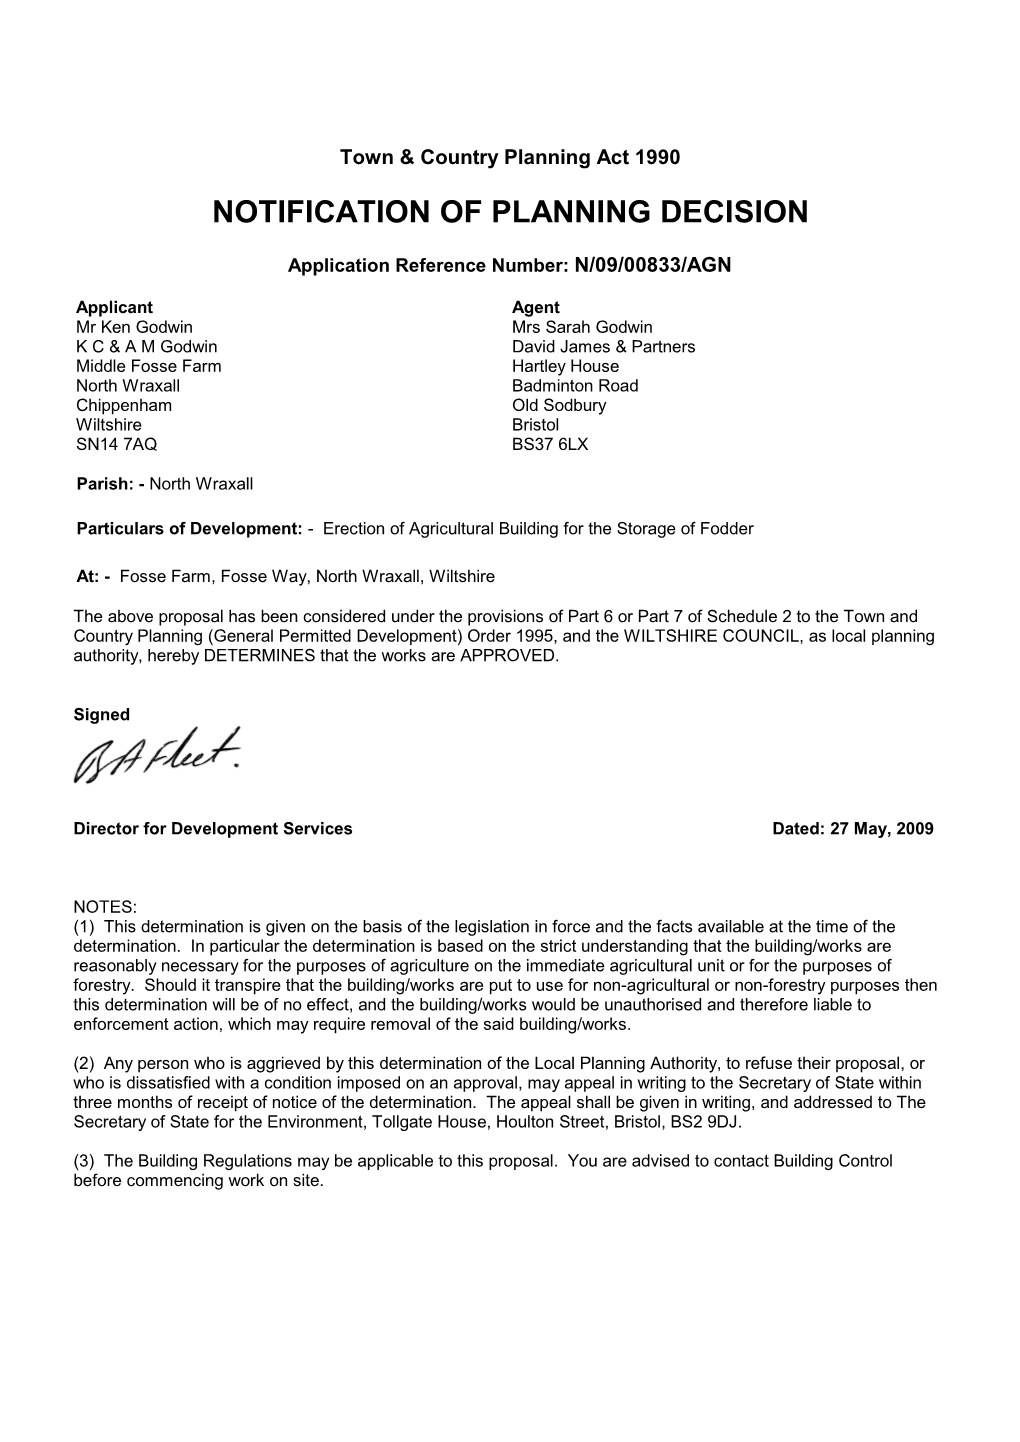 Notification of Planning Decision